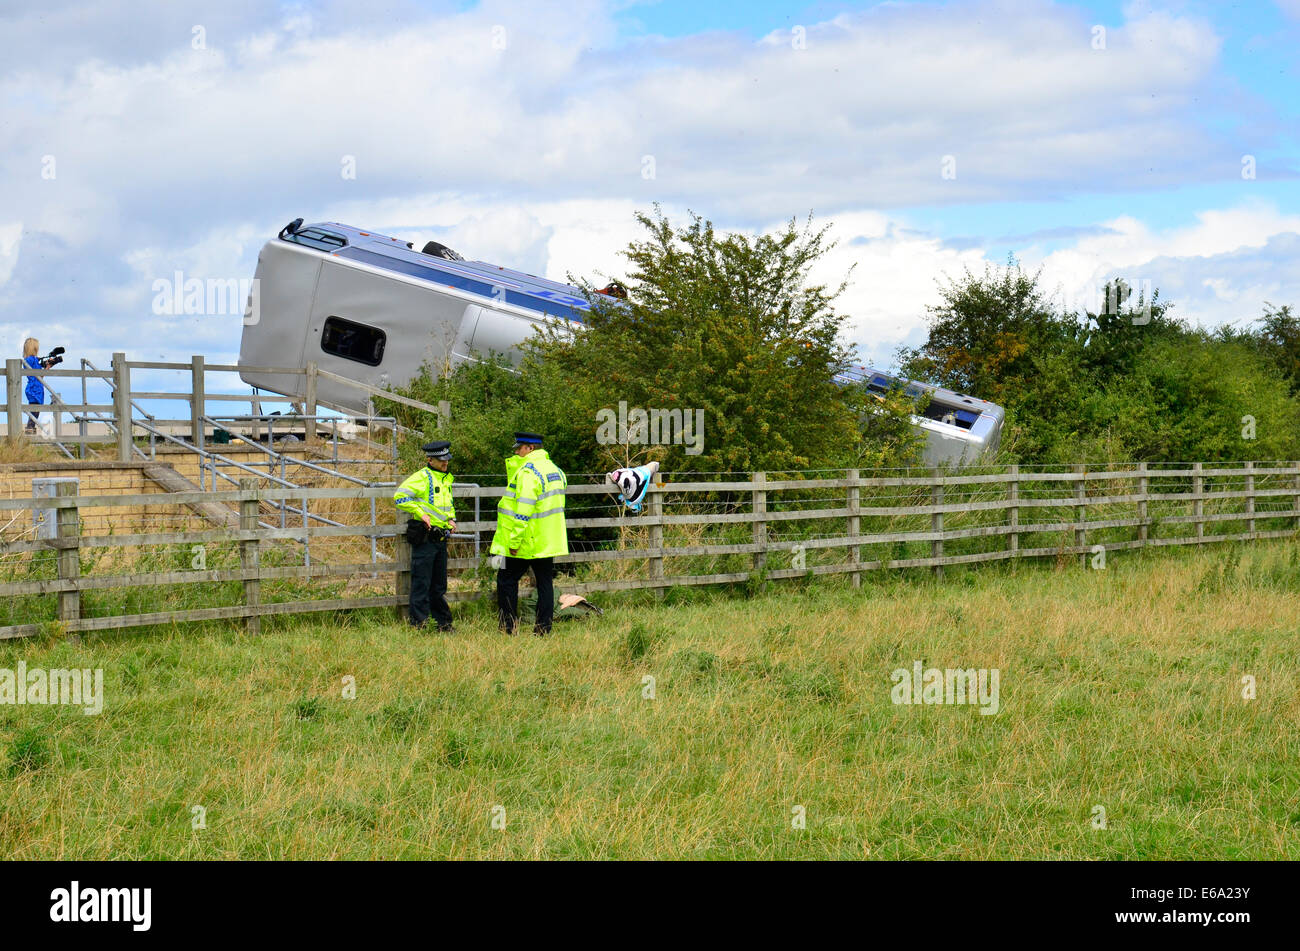 M5 Coach Crash south bound near Gloucestershire.19th August 2014 Stock Photo